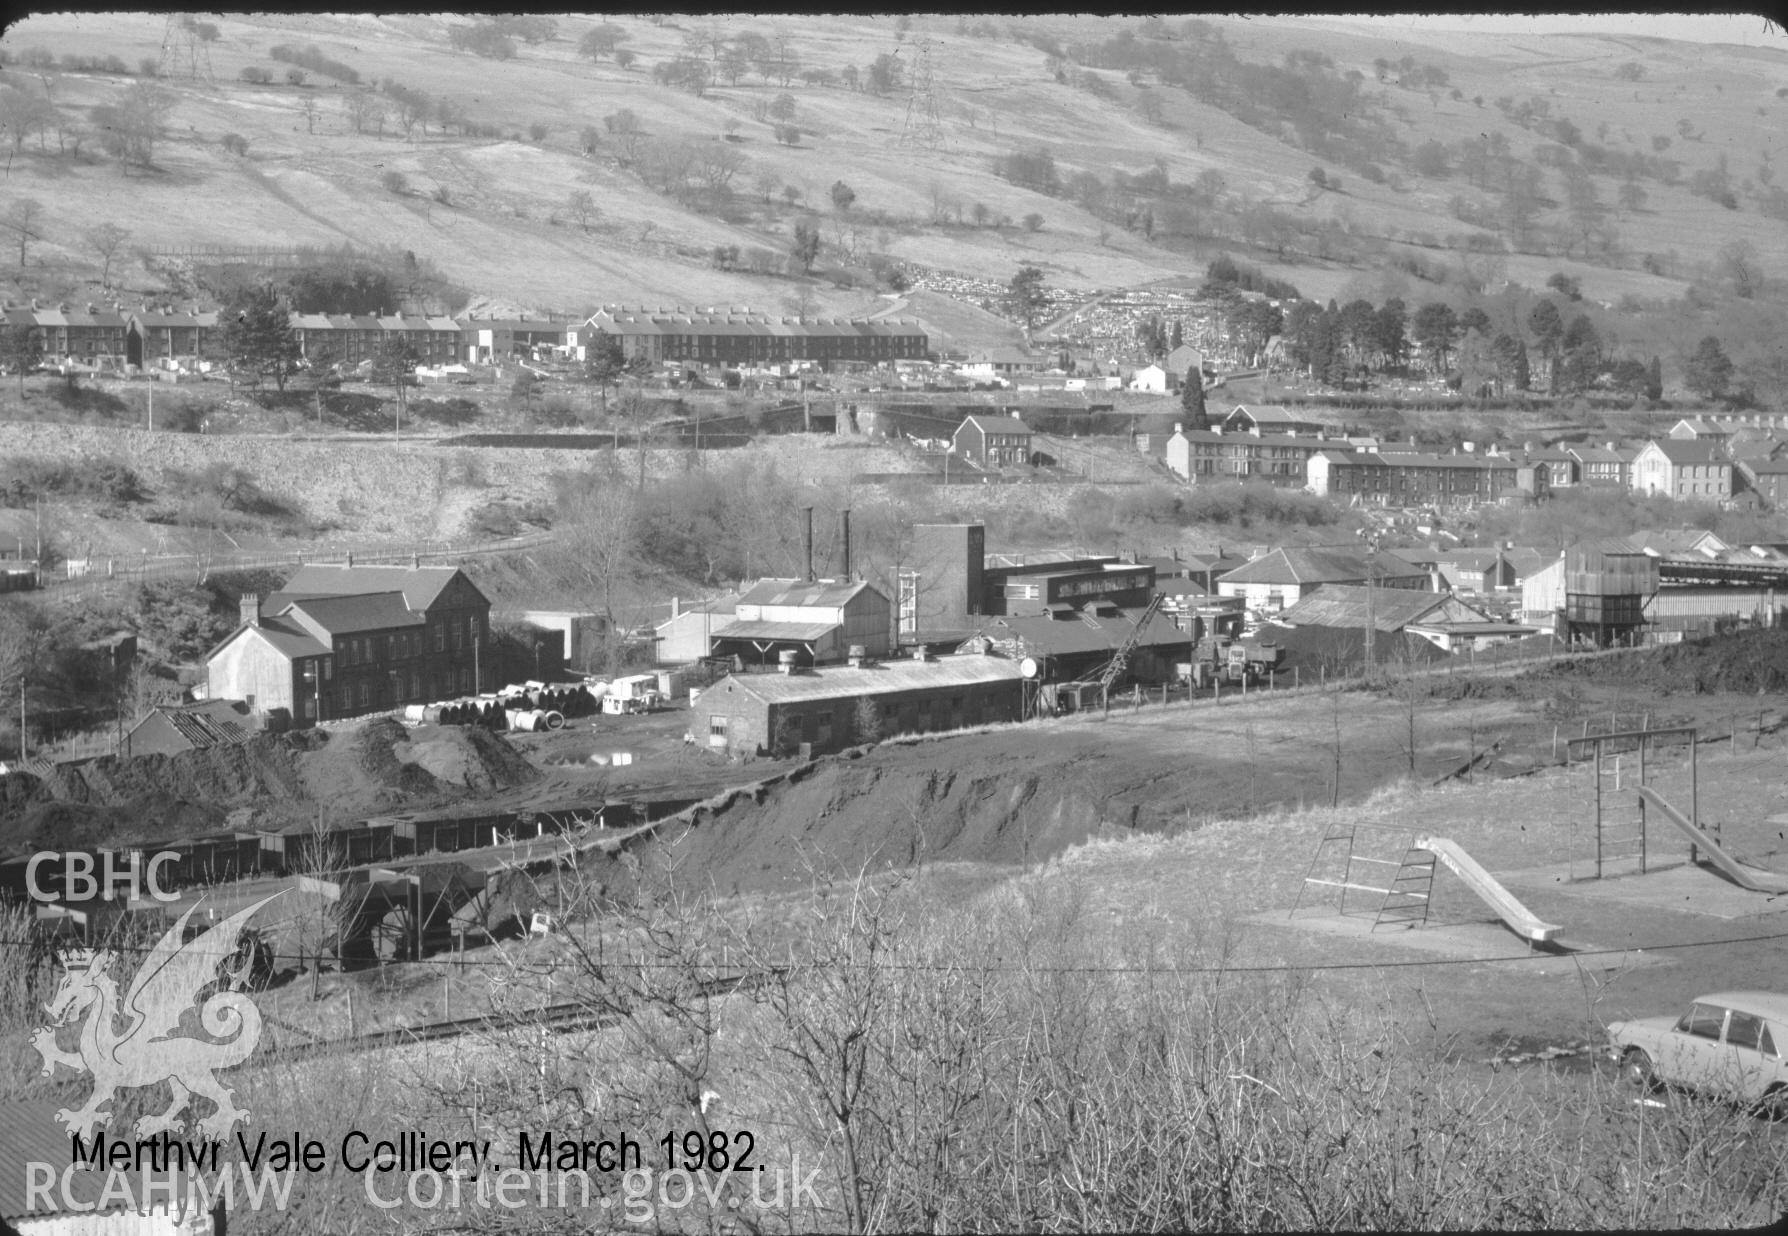 Digital photograph showing Merthyr Vale colliery with children's playground in the foreground, taken 1982.